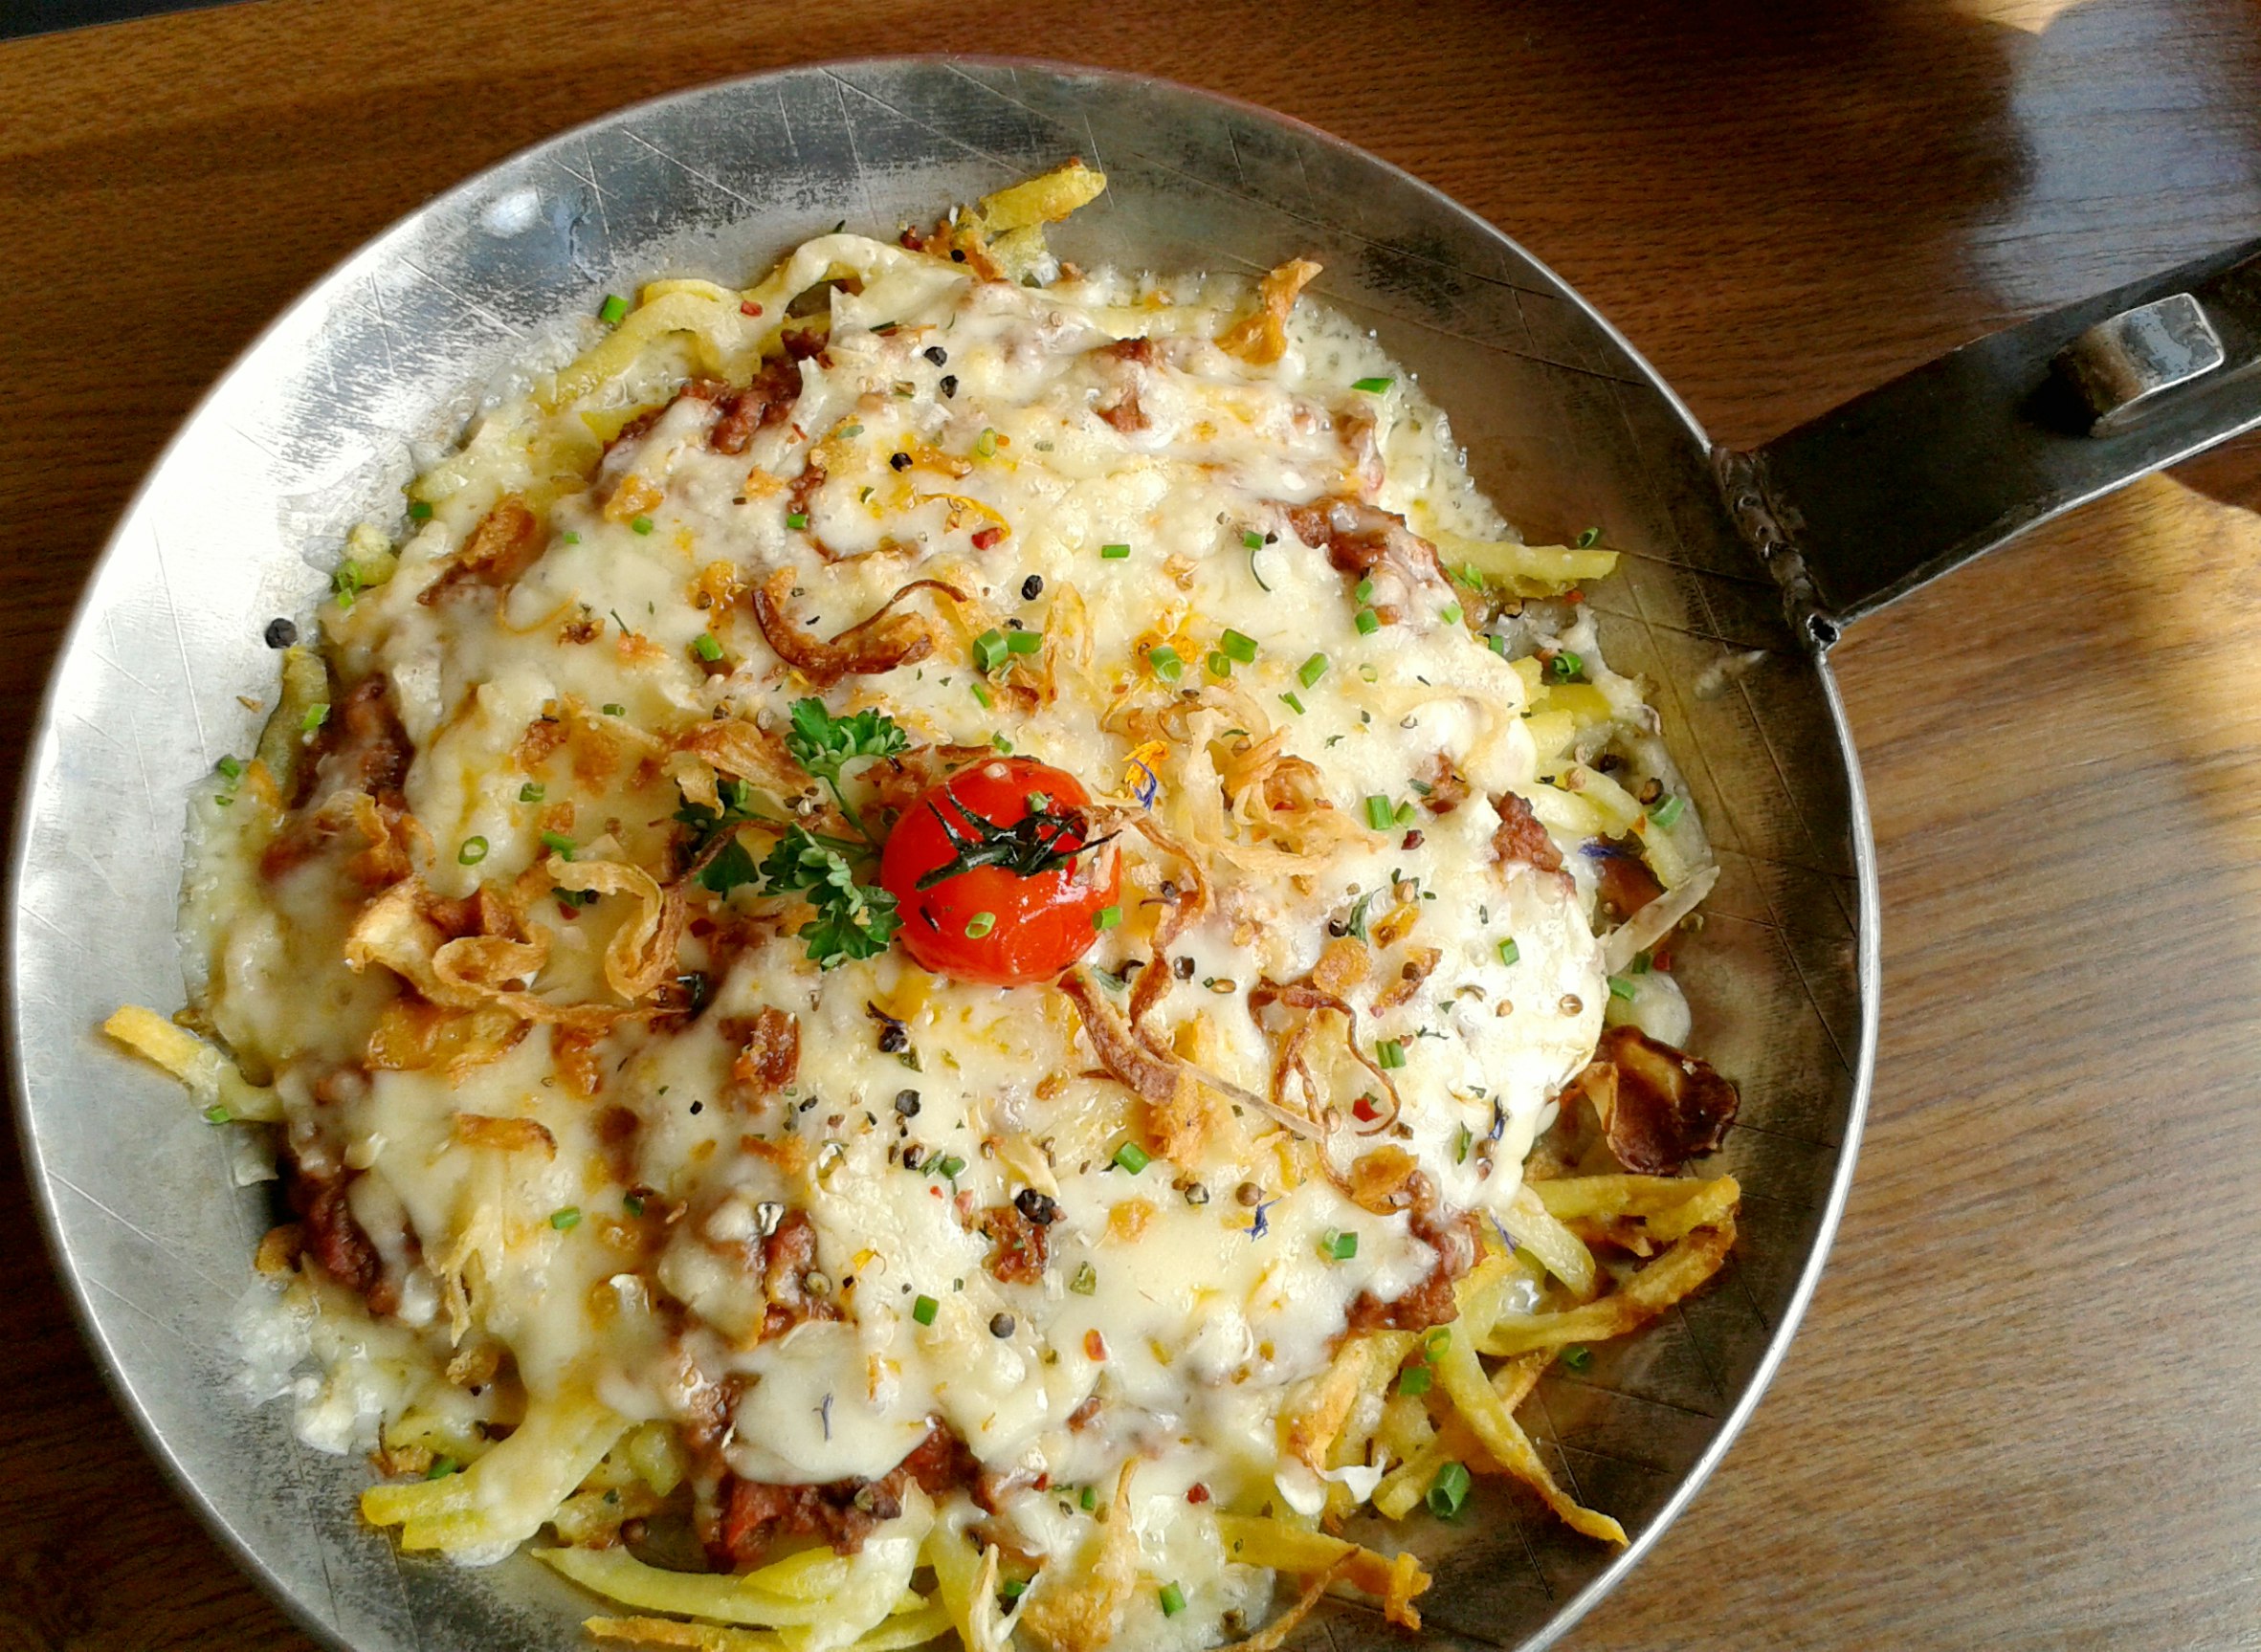 Close up of the "Roesti", a traditional swiss dish made with grated potatoes